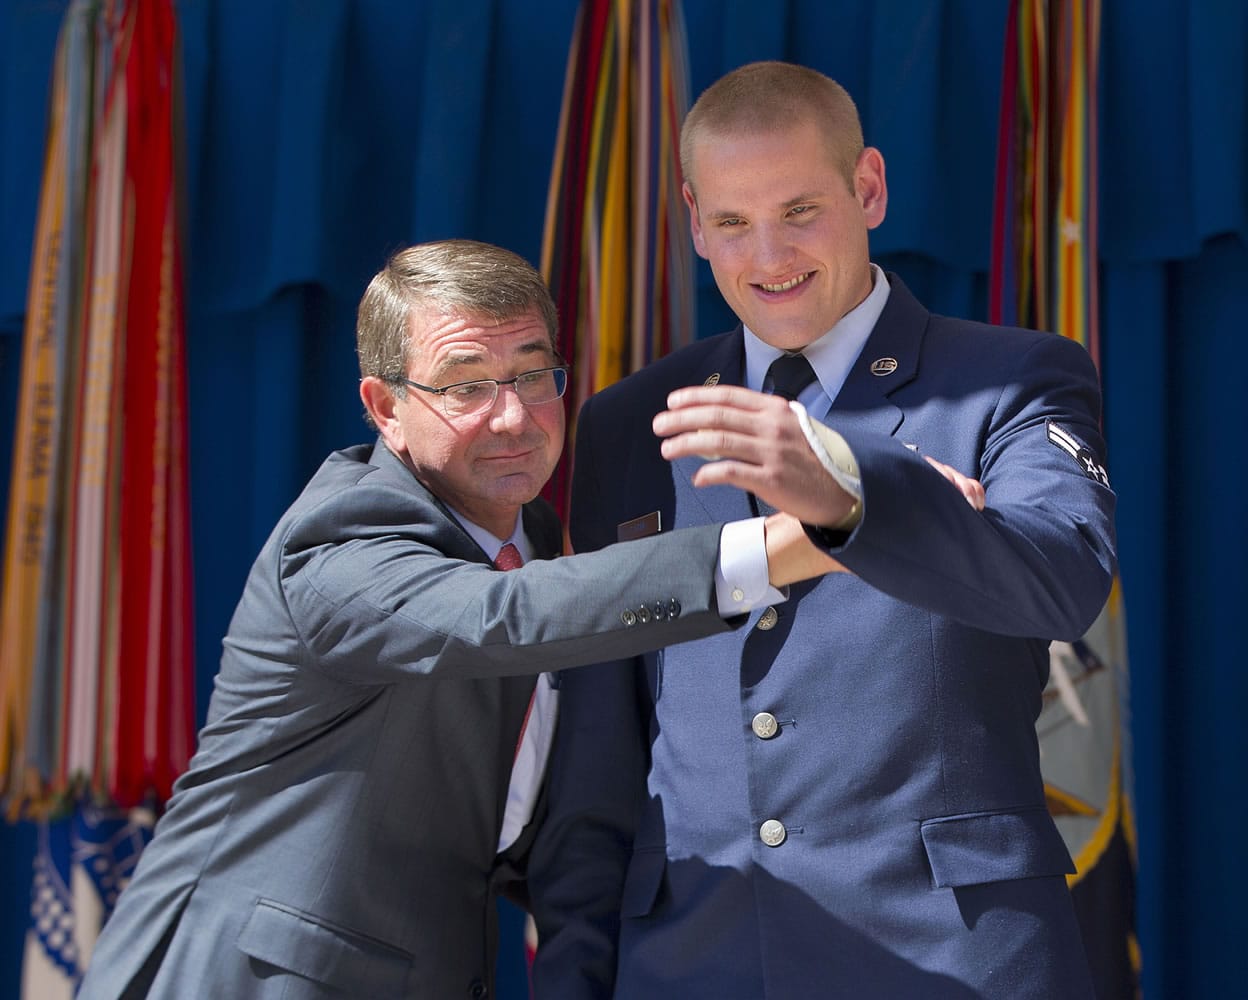 Defense Secretary Ash Carter, left, raises the injured left arm of Airman 1st Class Spencer Stone Sept. 17 before Stone received the Airman&#039;s Medal and Purple Heart medal, during a ceremony at the Pentagon in Washington. An Air Force spokesman says Stone, who helped subdue an attacker on a Paris-bound train in August, is in stable condition after being stabbed in California.